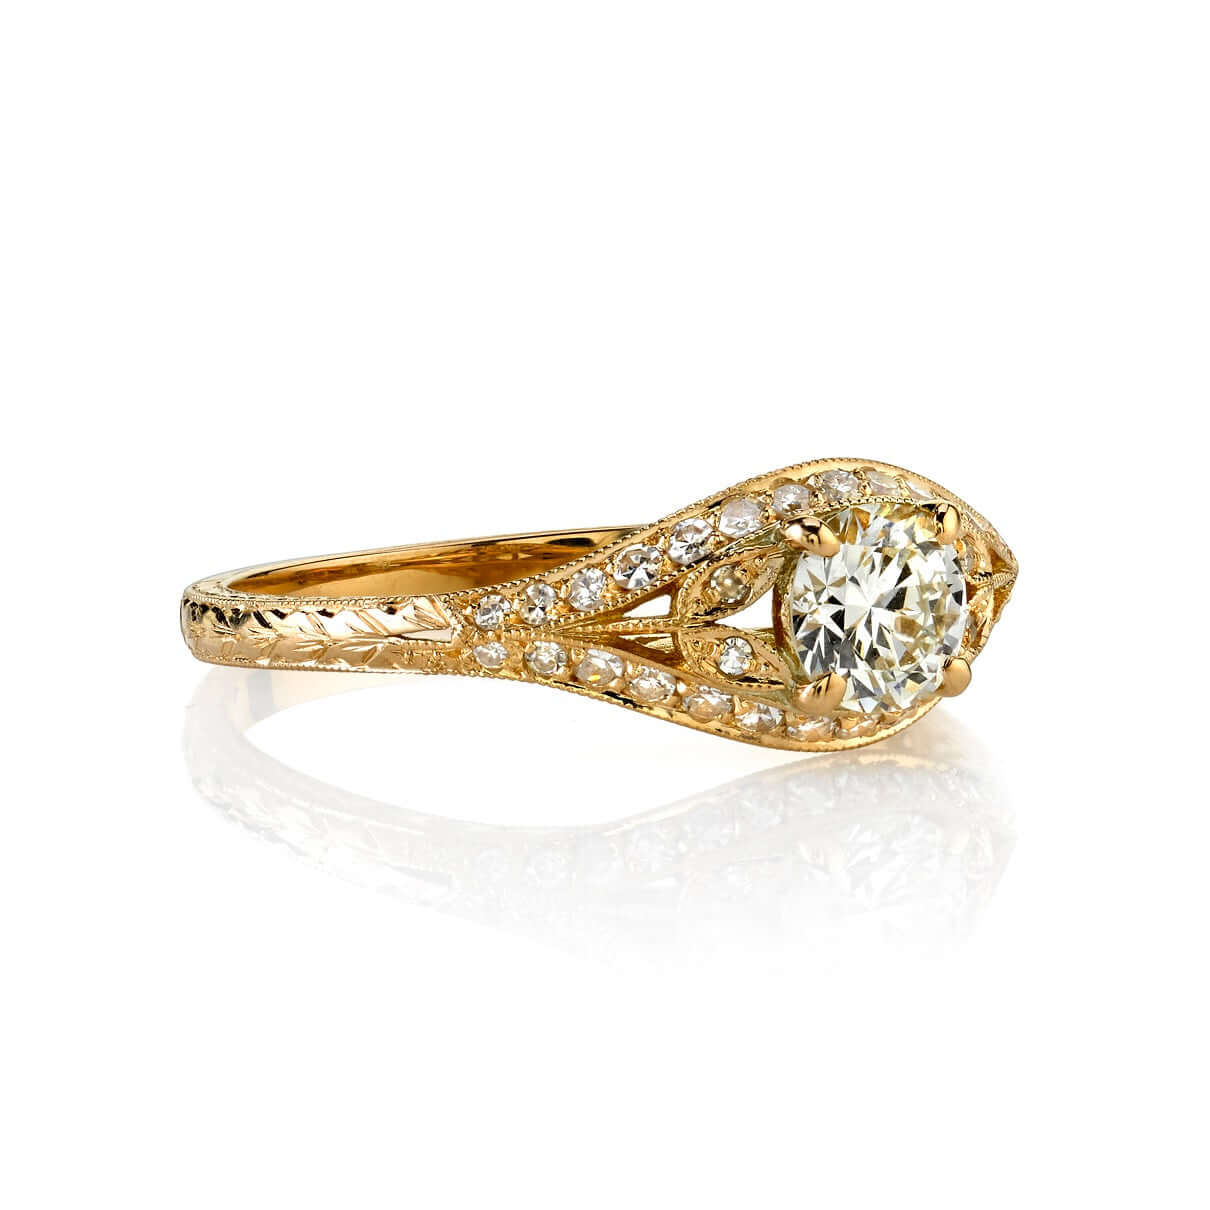 SINGLE STONE CHLOE RING featuring 0.49ct L/SI2 GIA certified old European cut diamond with 0.28ctw old European cut accent diamonds set in a handcrafted 18K yellow gold mounting.